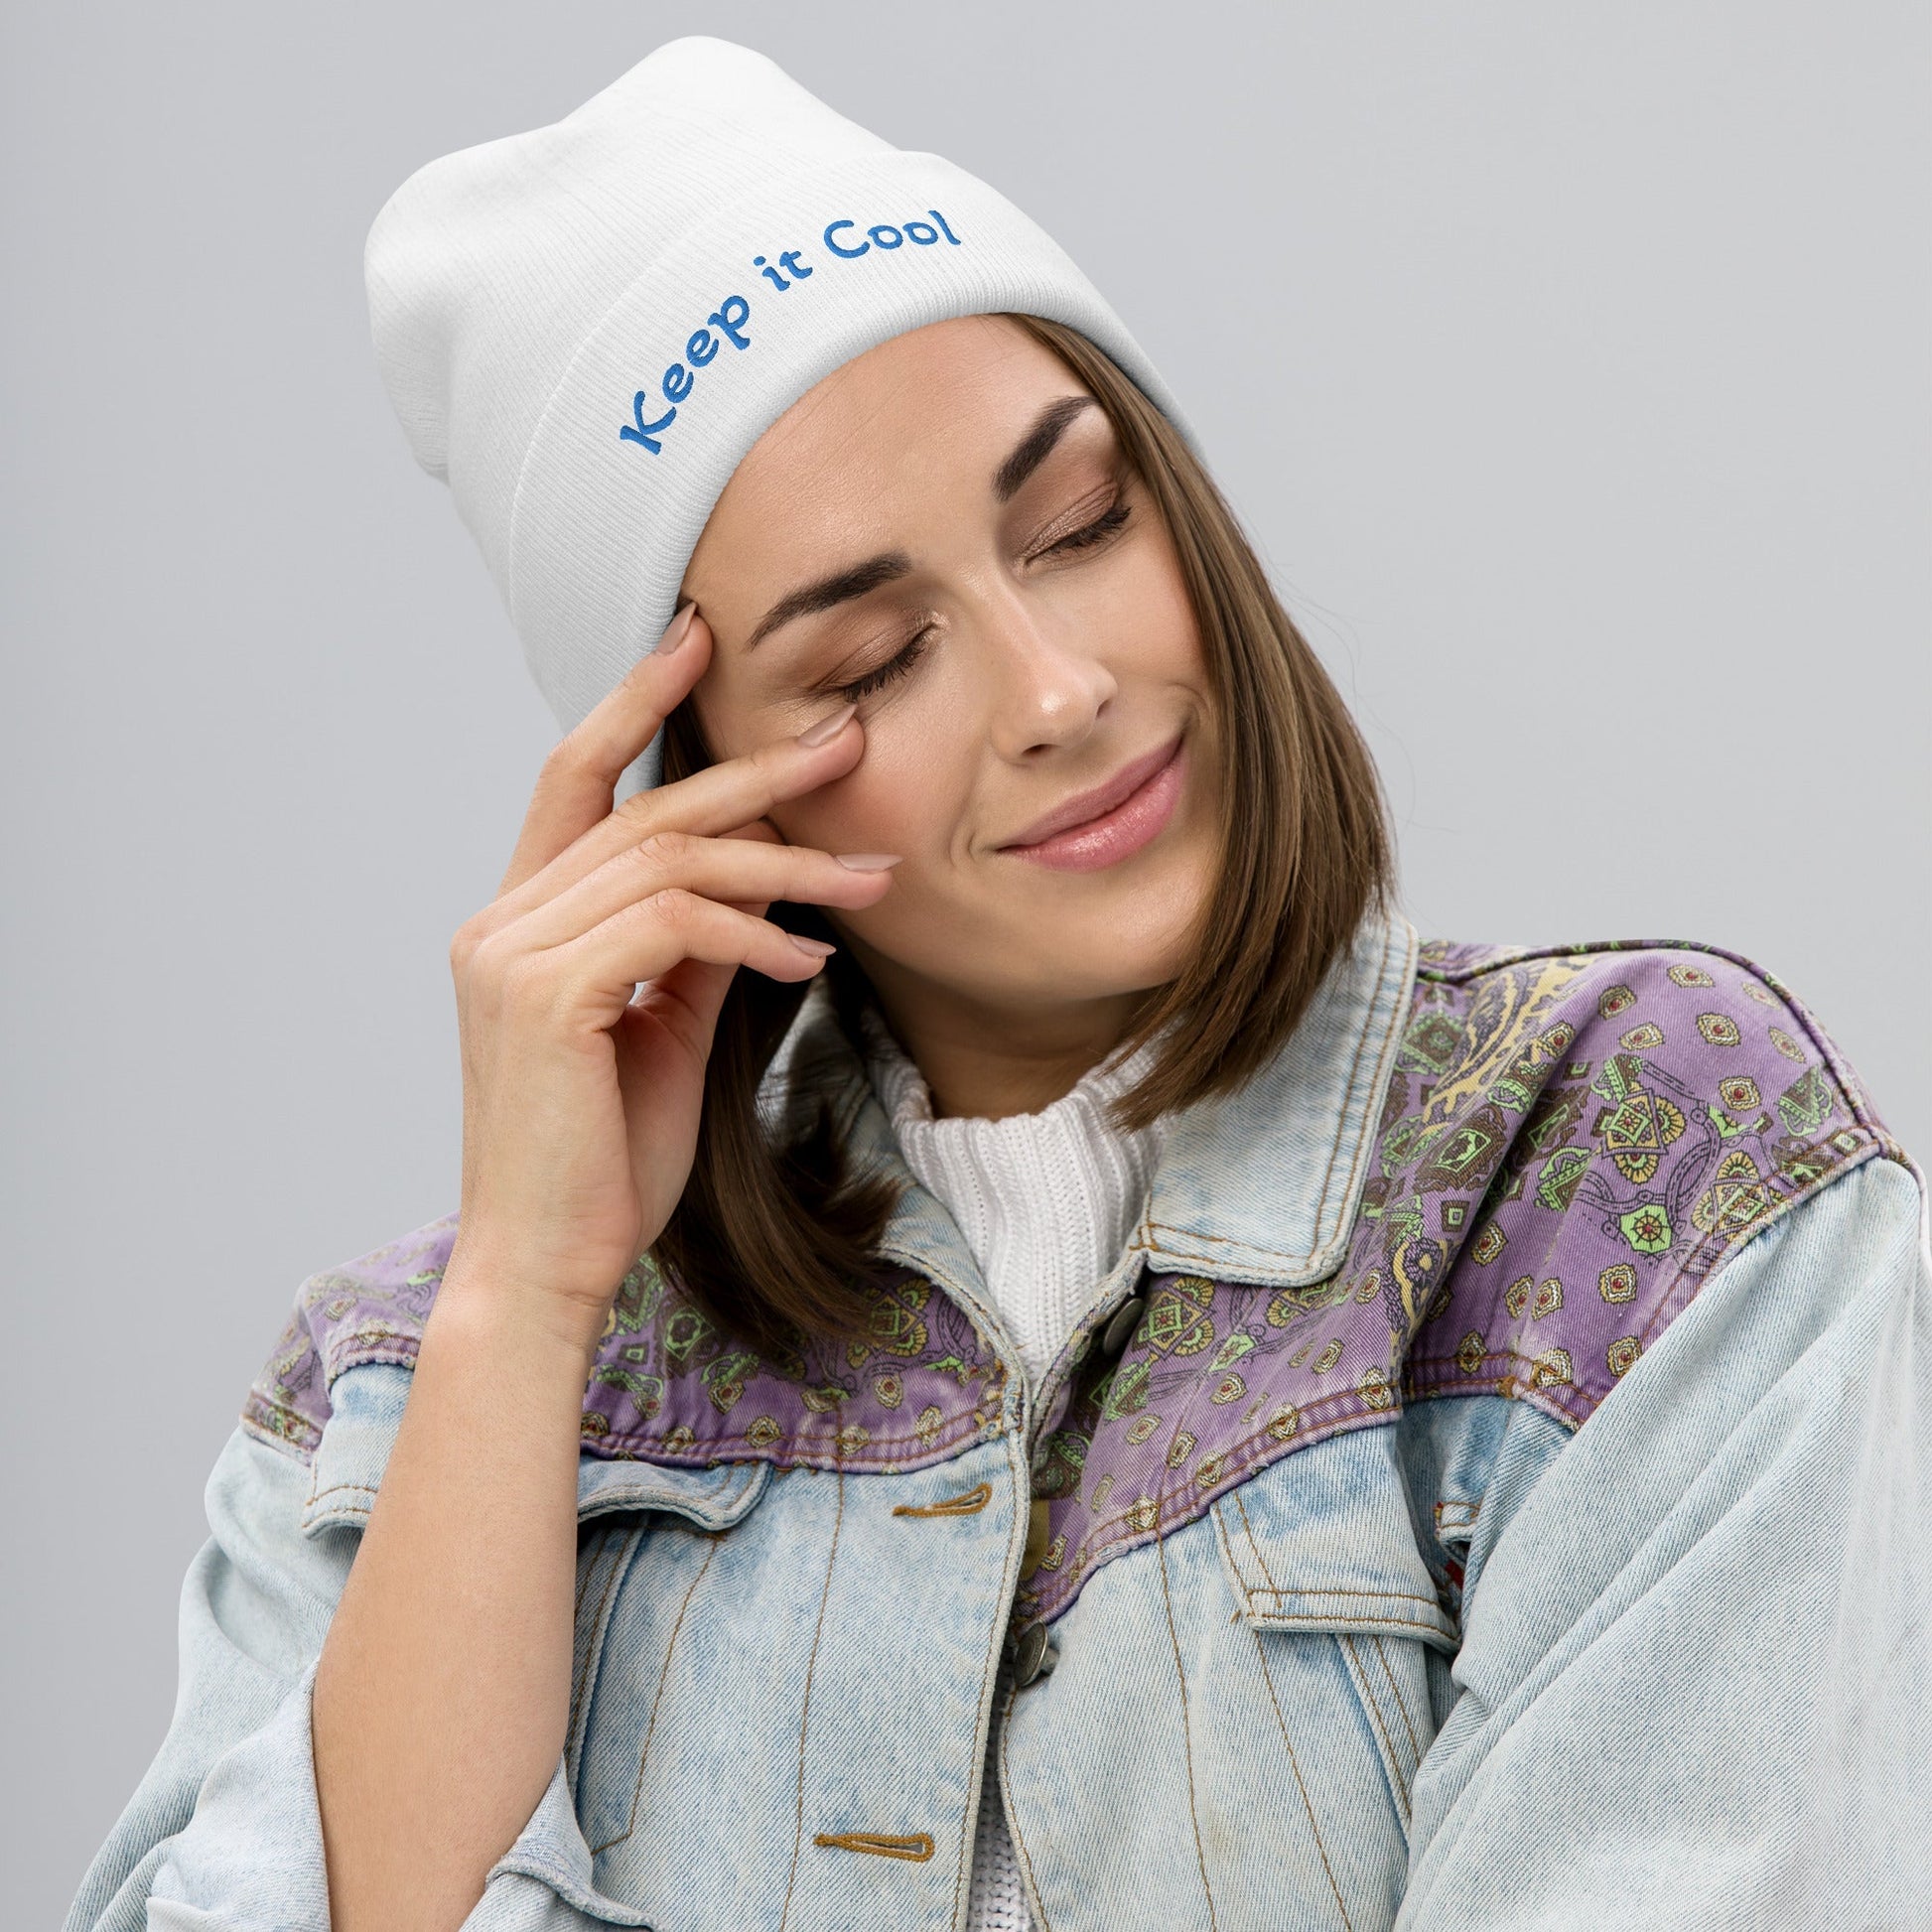 Unique Embroidered Beanies You Need for Your Winter Wardrobe